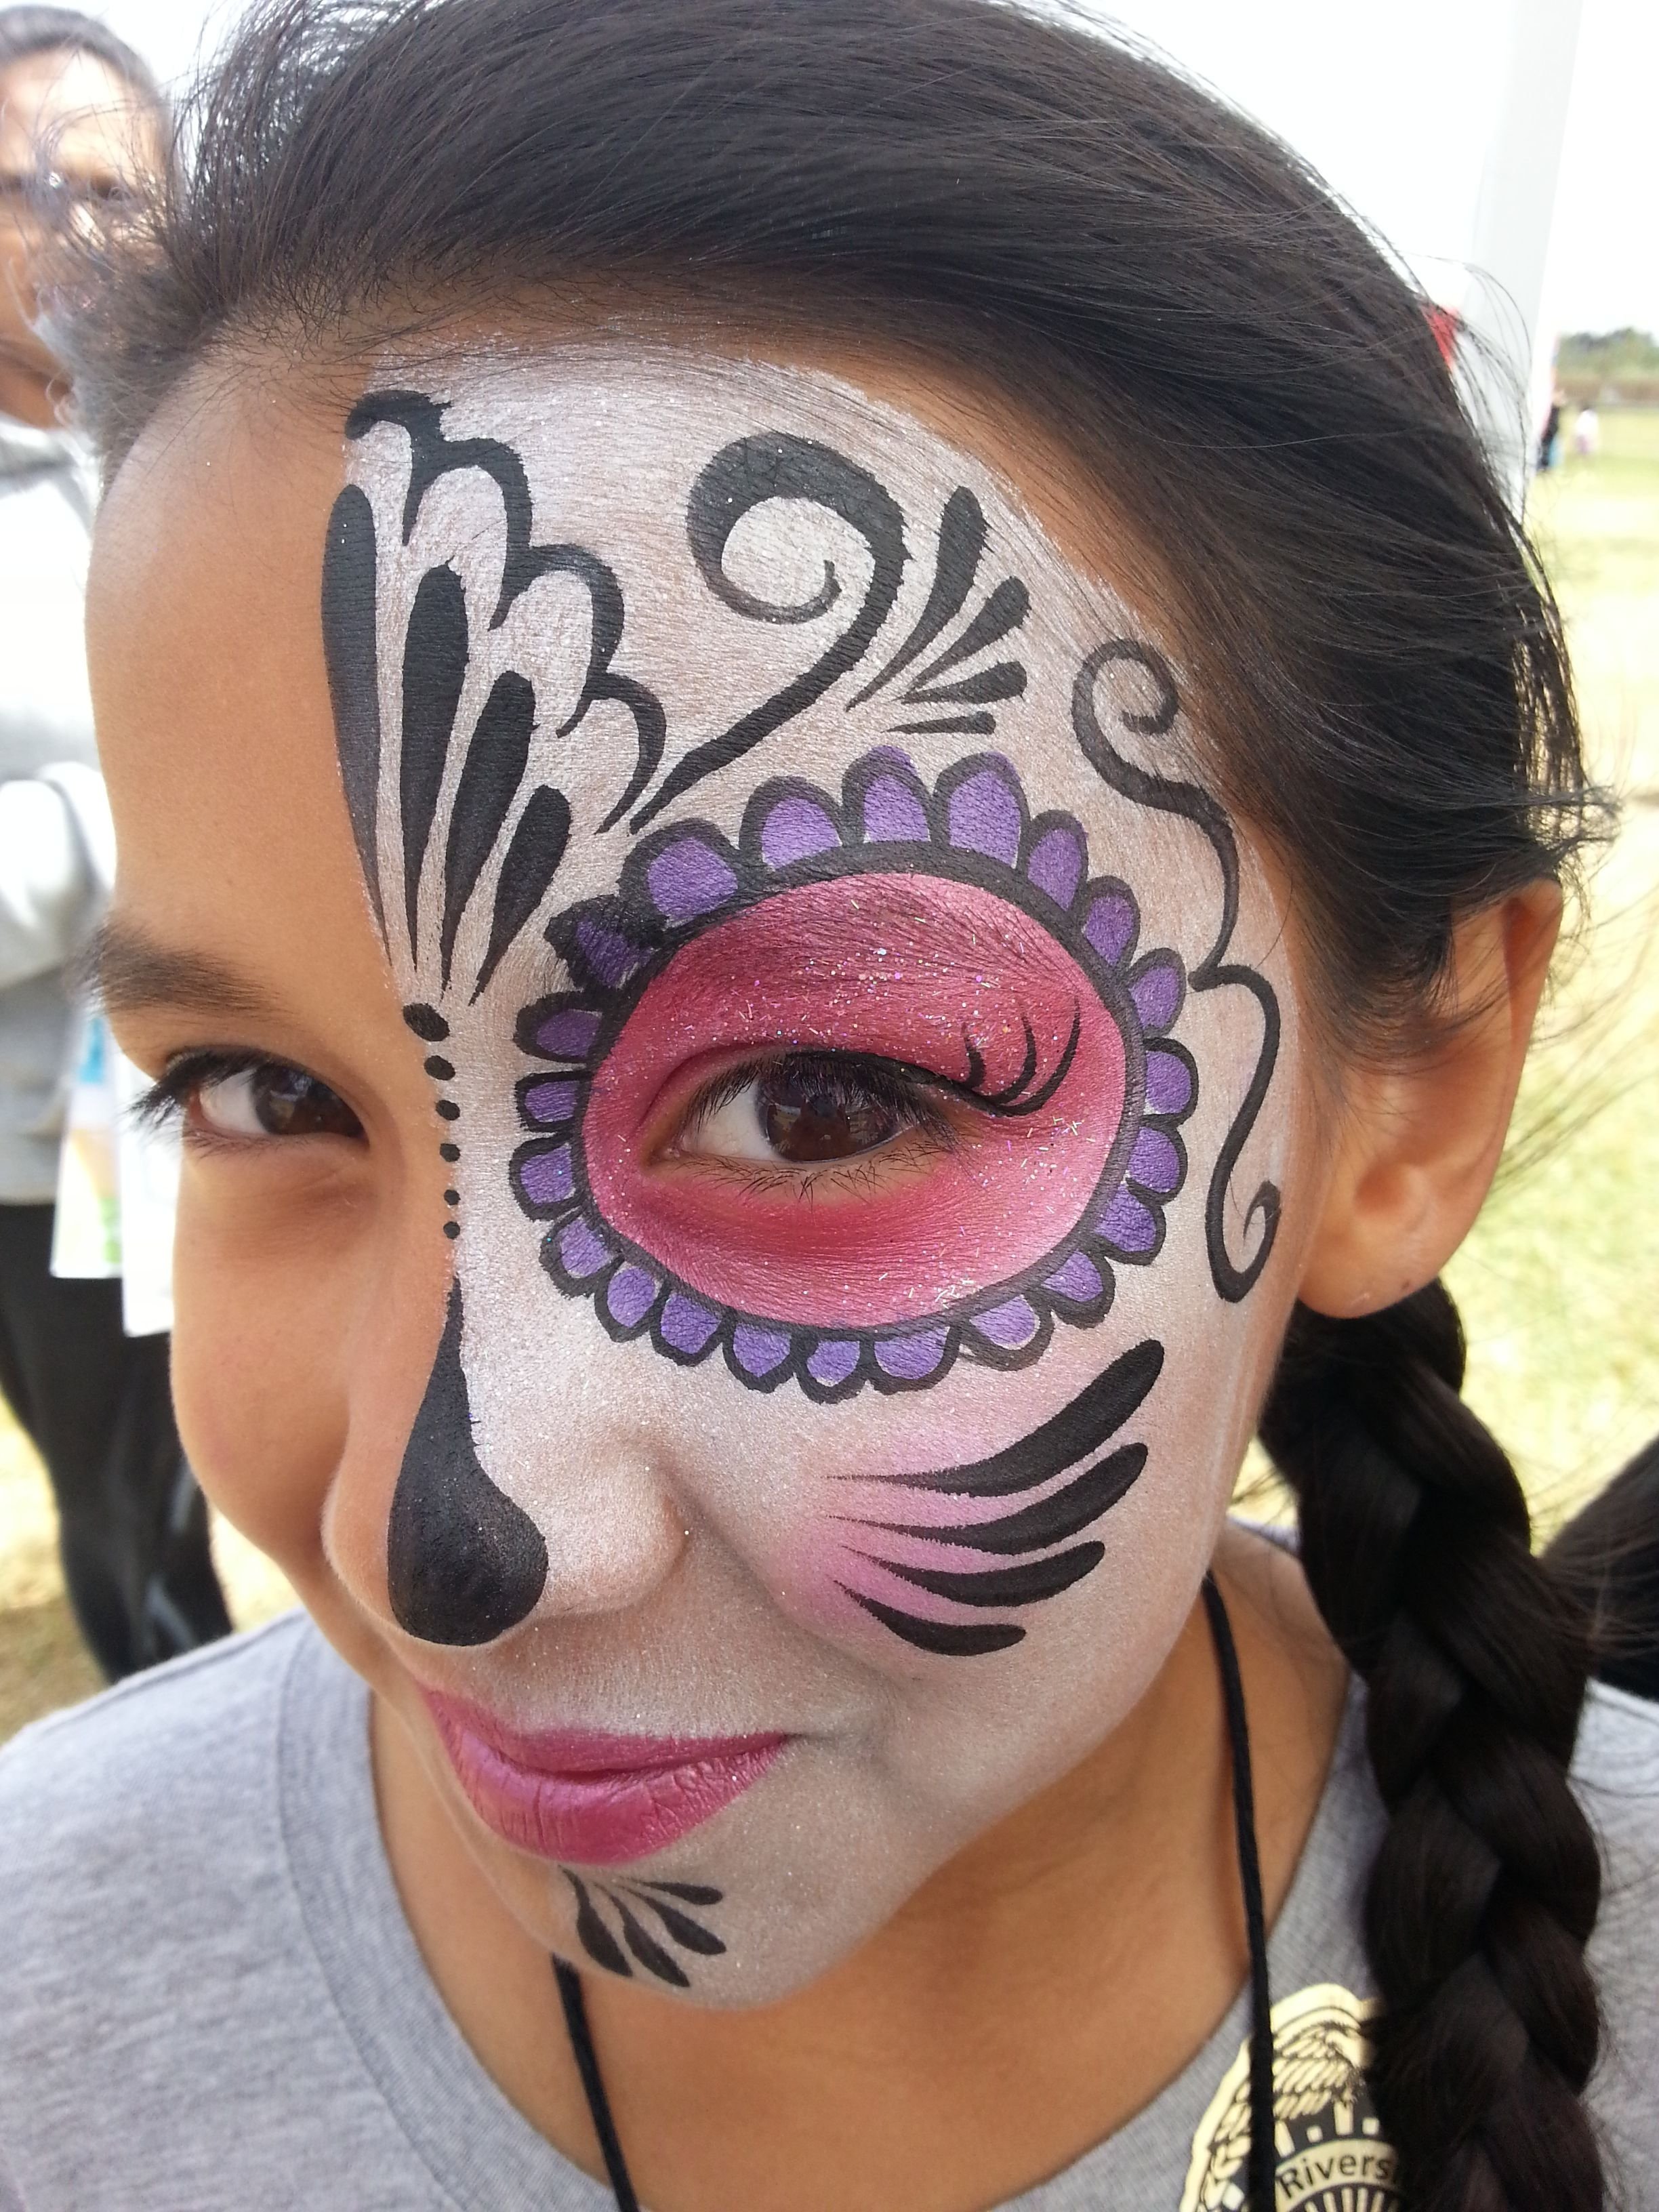 10 Most Recommended Day Of Dead Face Painting Ideas dia de los muertos articles for kids facepainting orange 2022